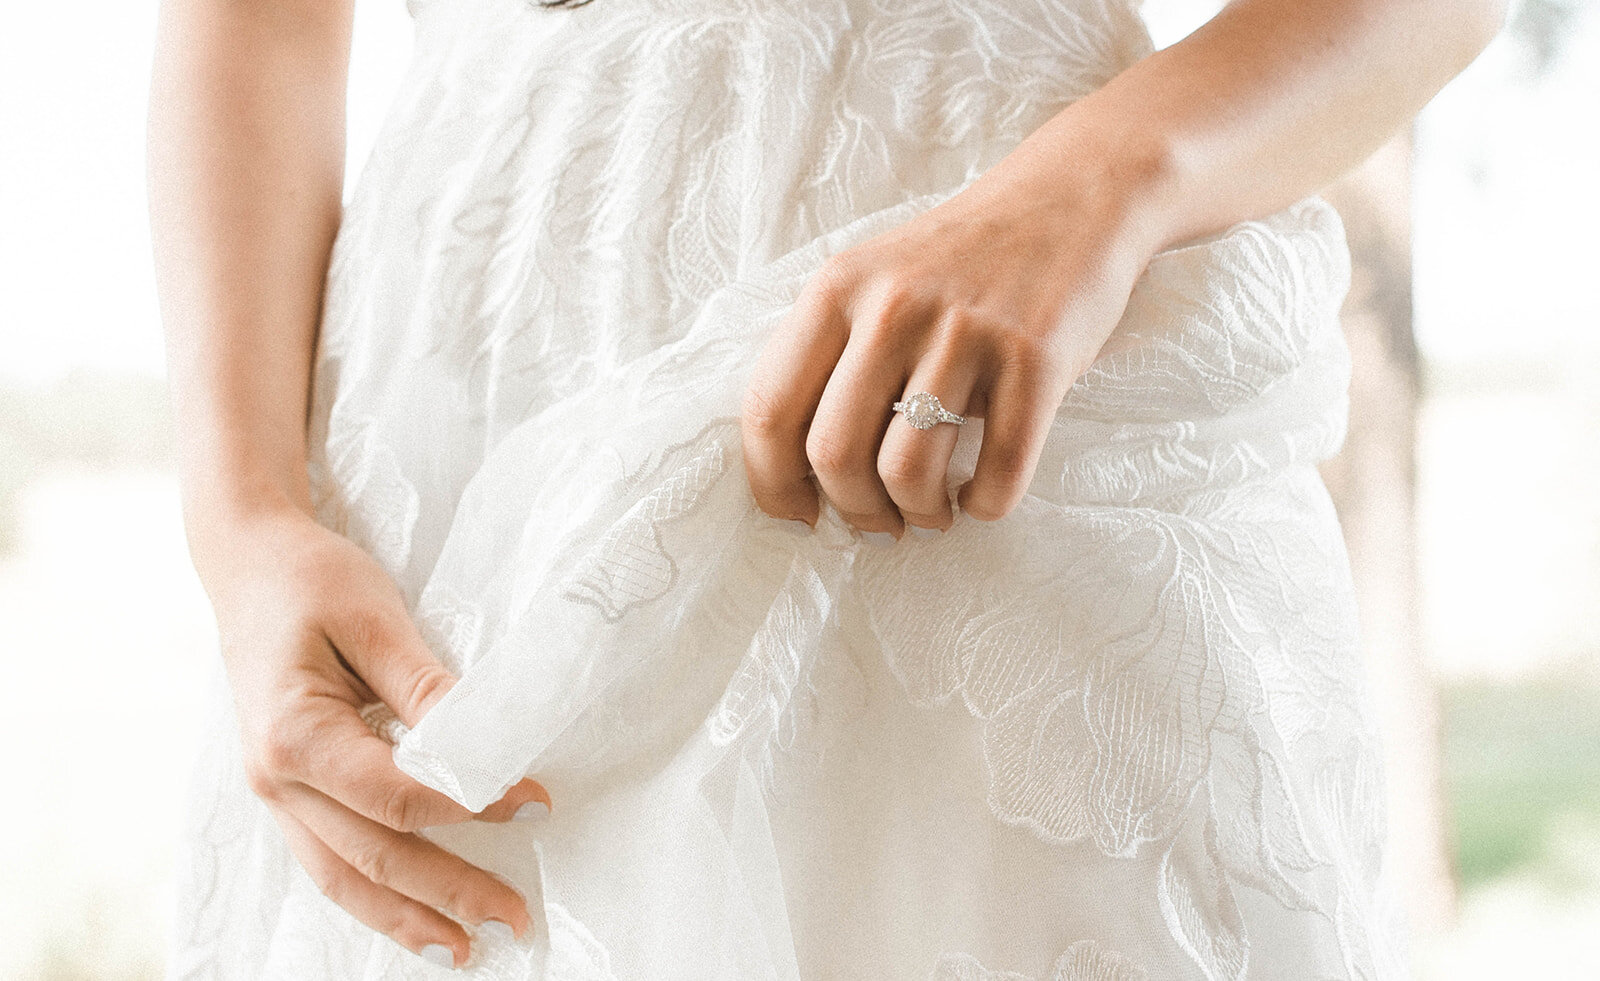 Colorado bride shows off engagement ring and boho wedding gown